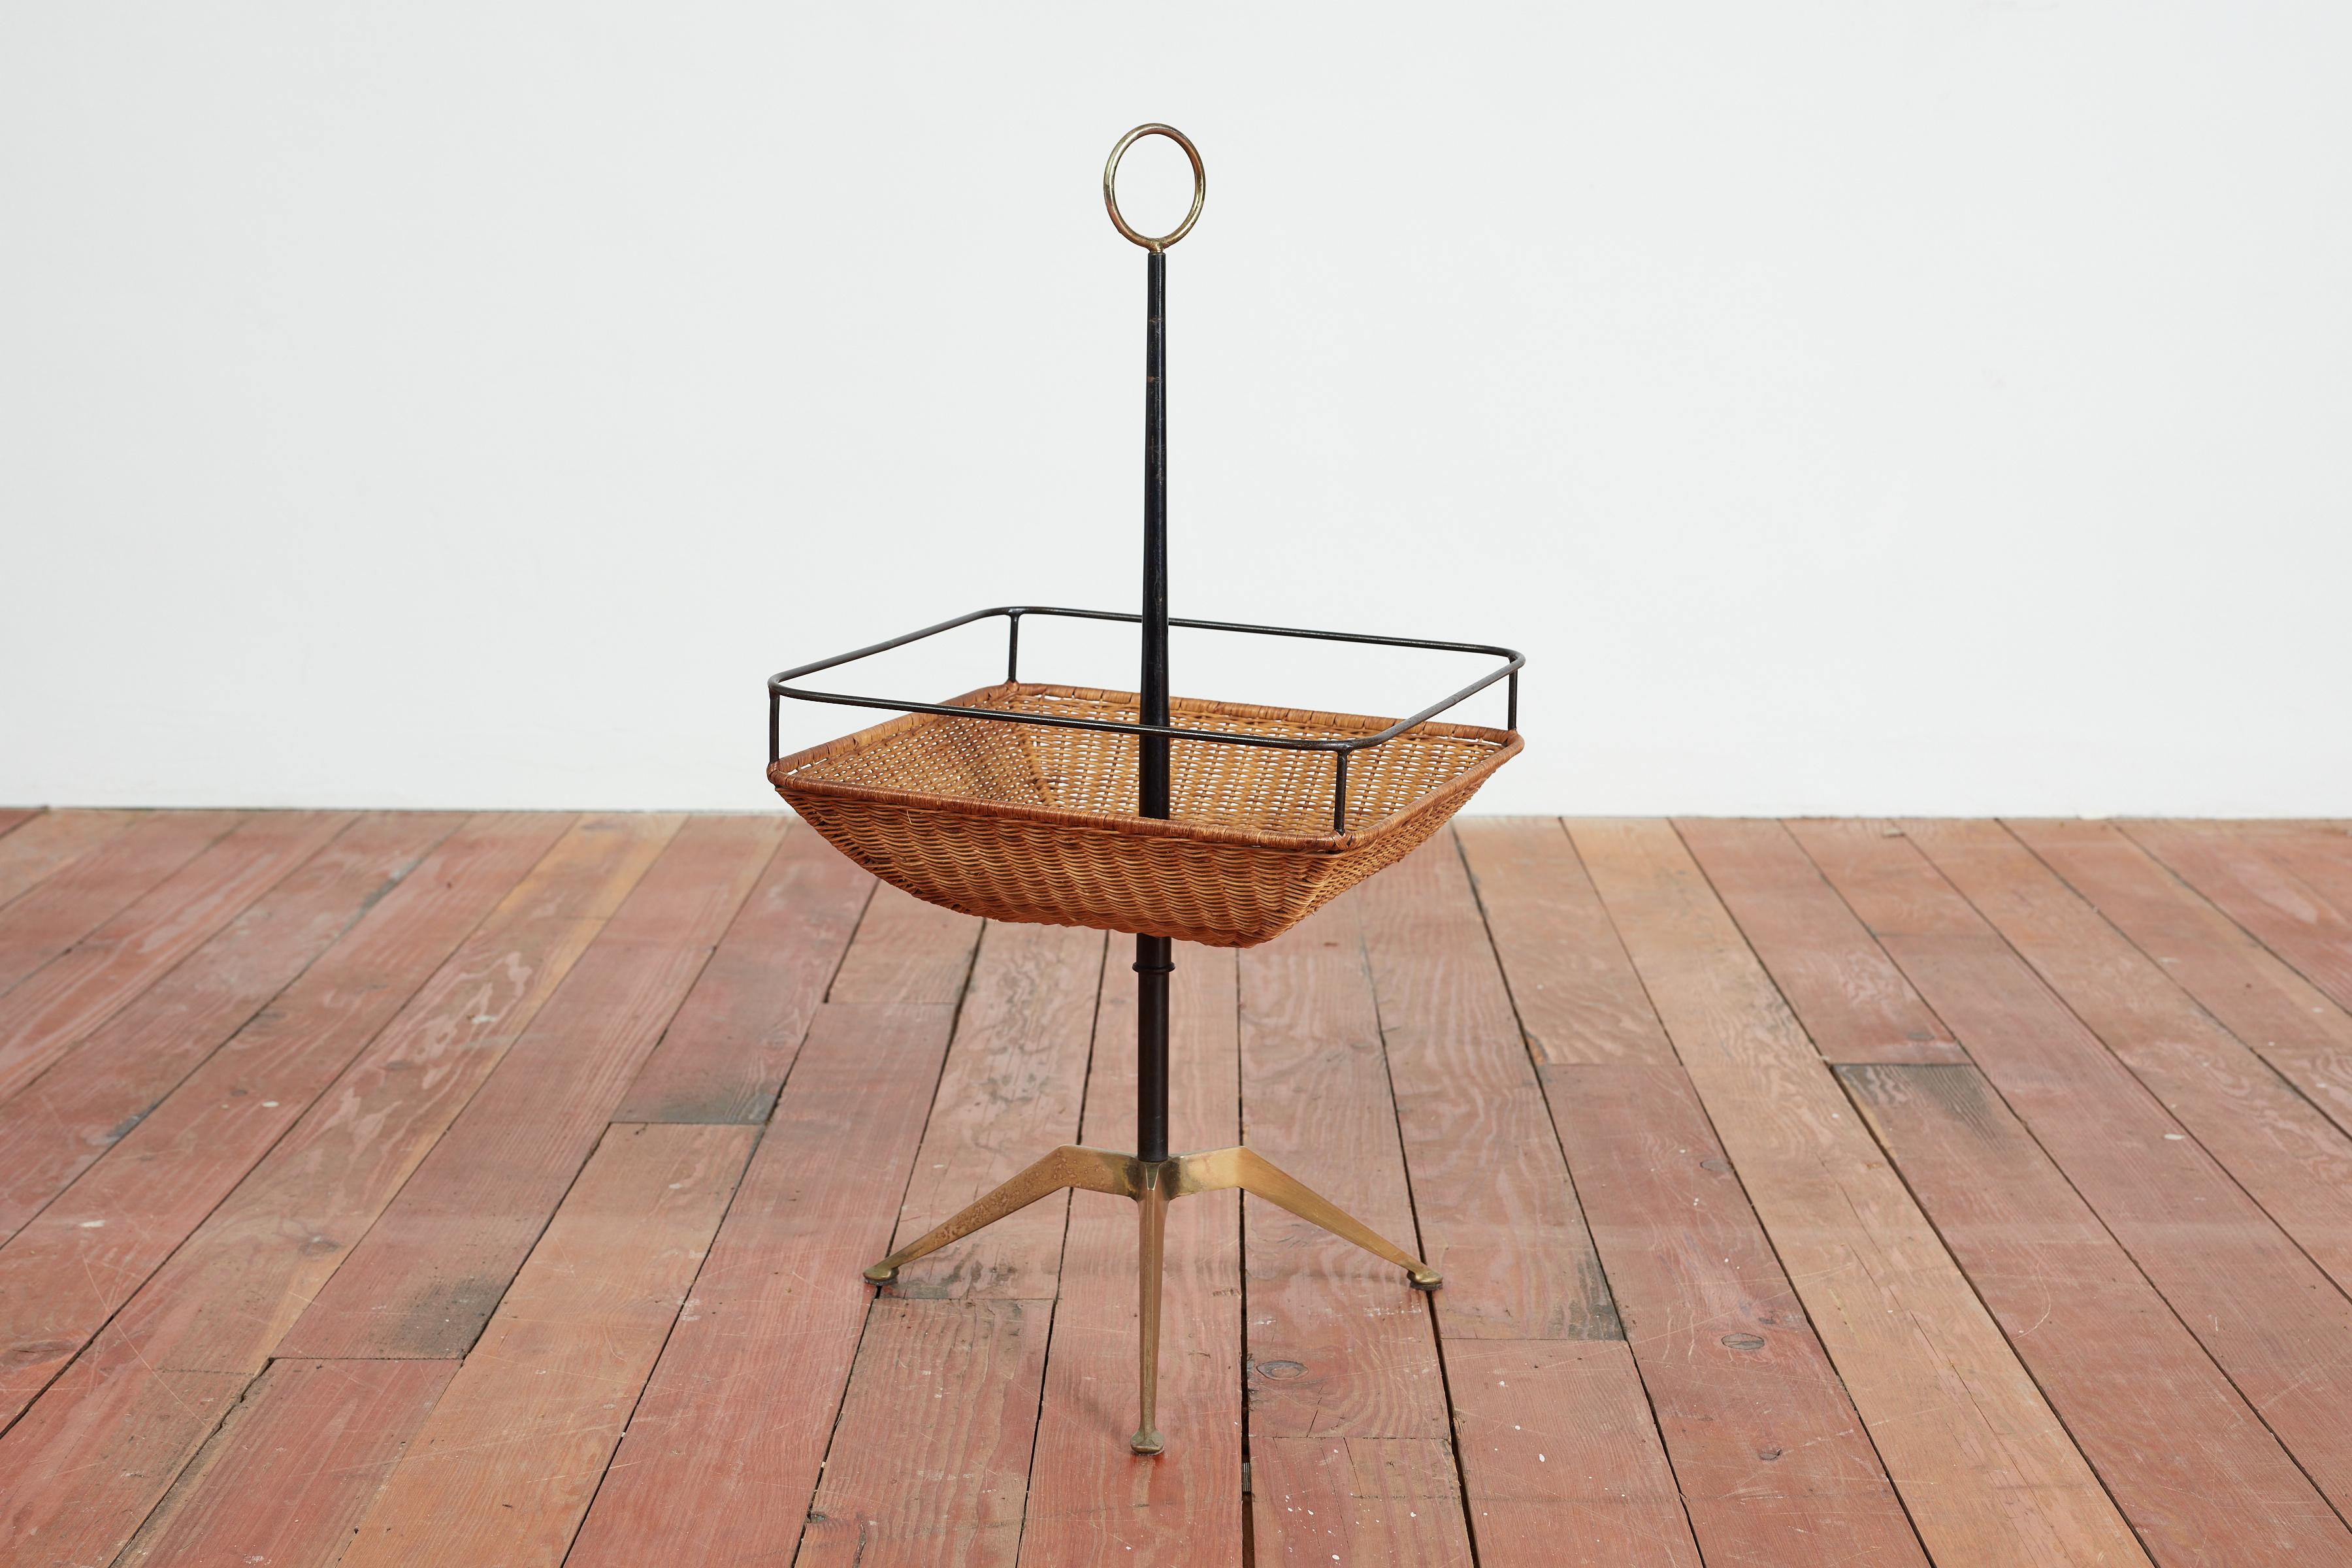 Fantastic Italian catch all with iron stem, brass tripod base and square shaped wicker basket that swivels with brass loop on top. 
Perfect combination of form and function - can be used for anything like keys, magazines, clickers  - you name it!